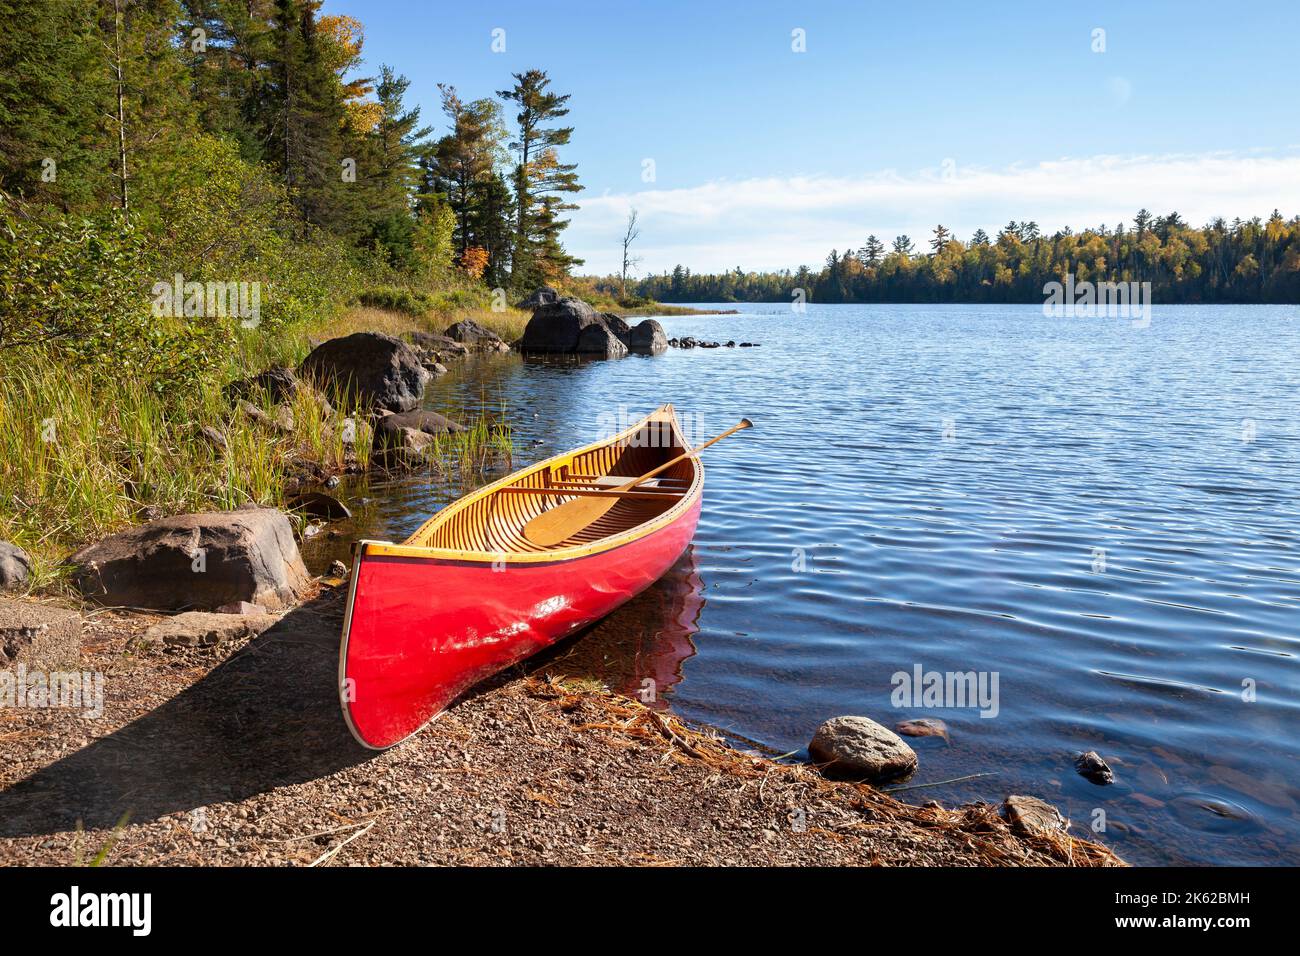 Red wooden canoe on shore of northern Minnesota lake with rocks and pines along the shore Stock Photo